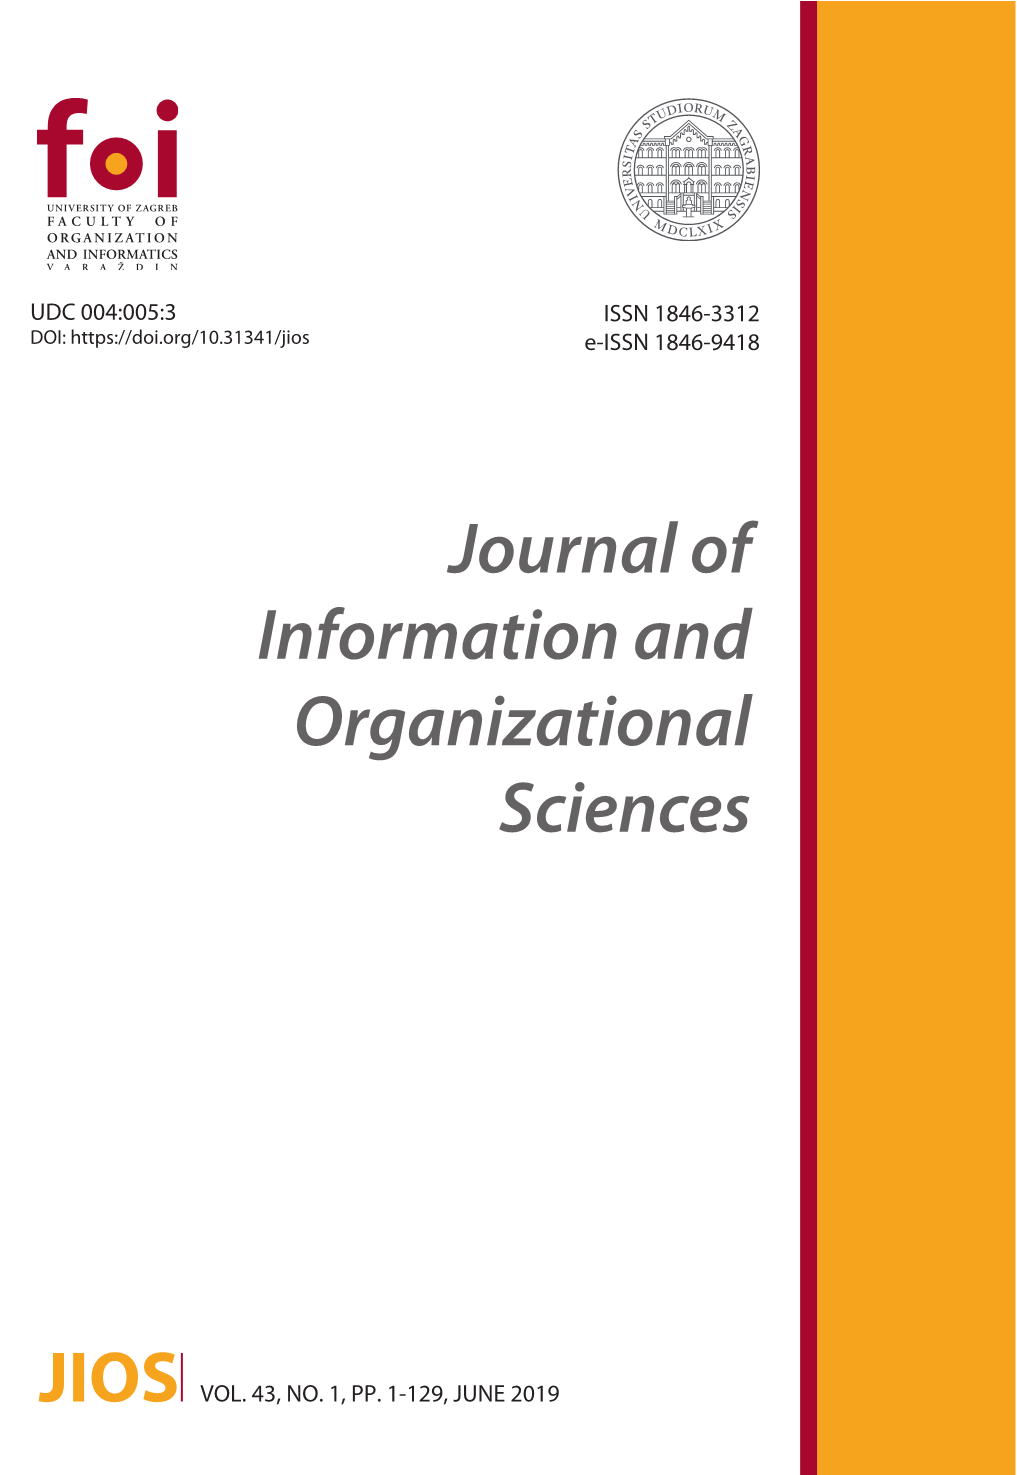 Technology Acceptance Model Based Study of Students’ Attitudes Toward Use of Enterprise Resource Planning Solutions Cover Image